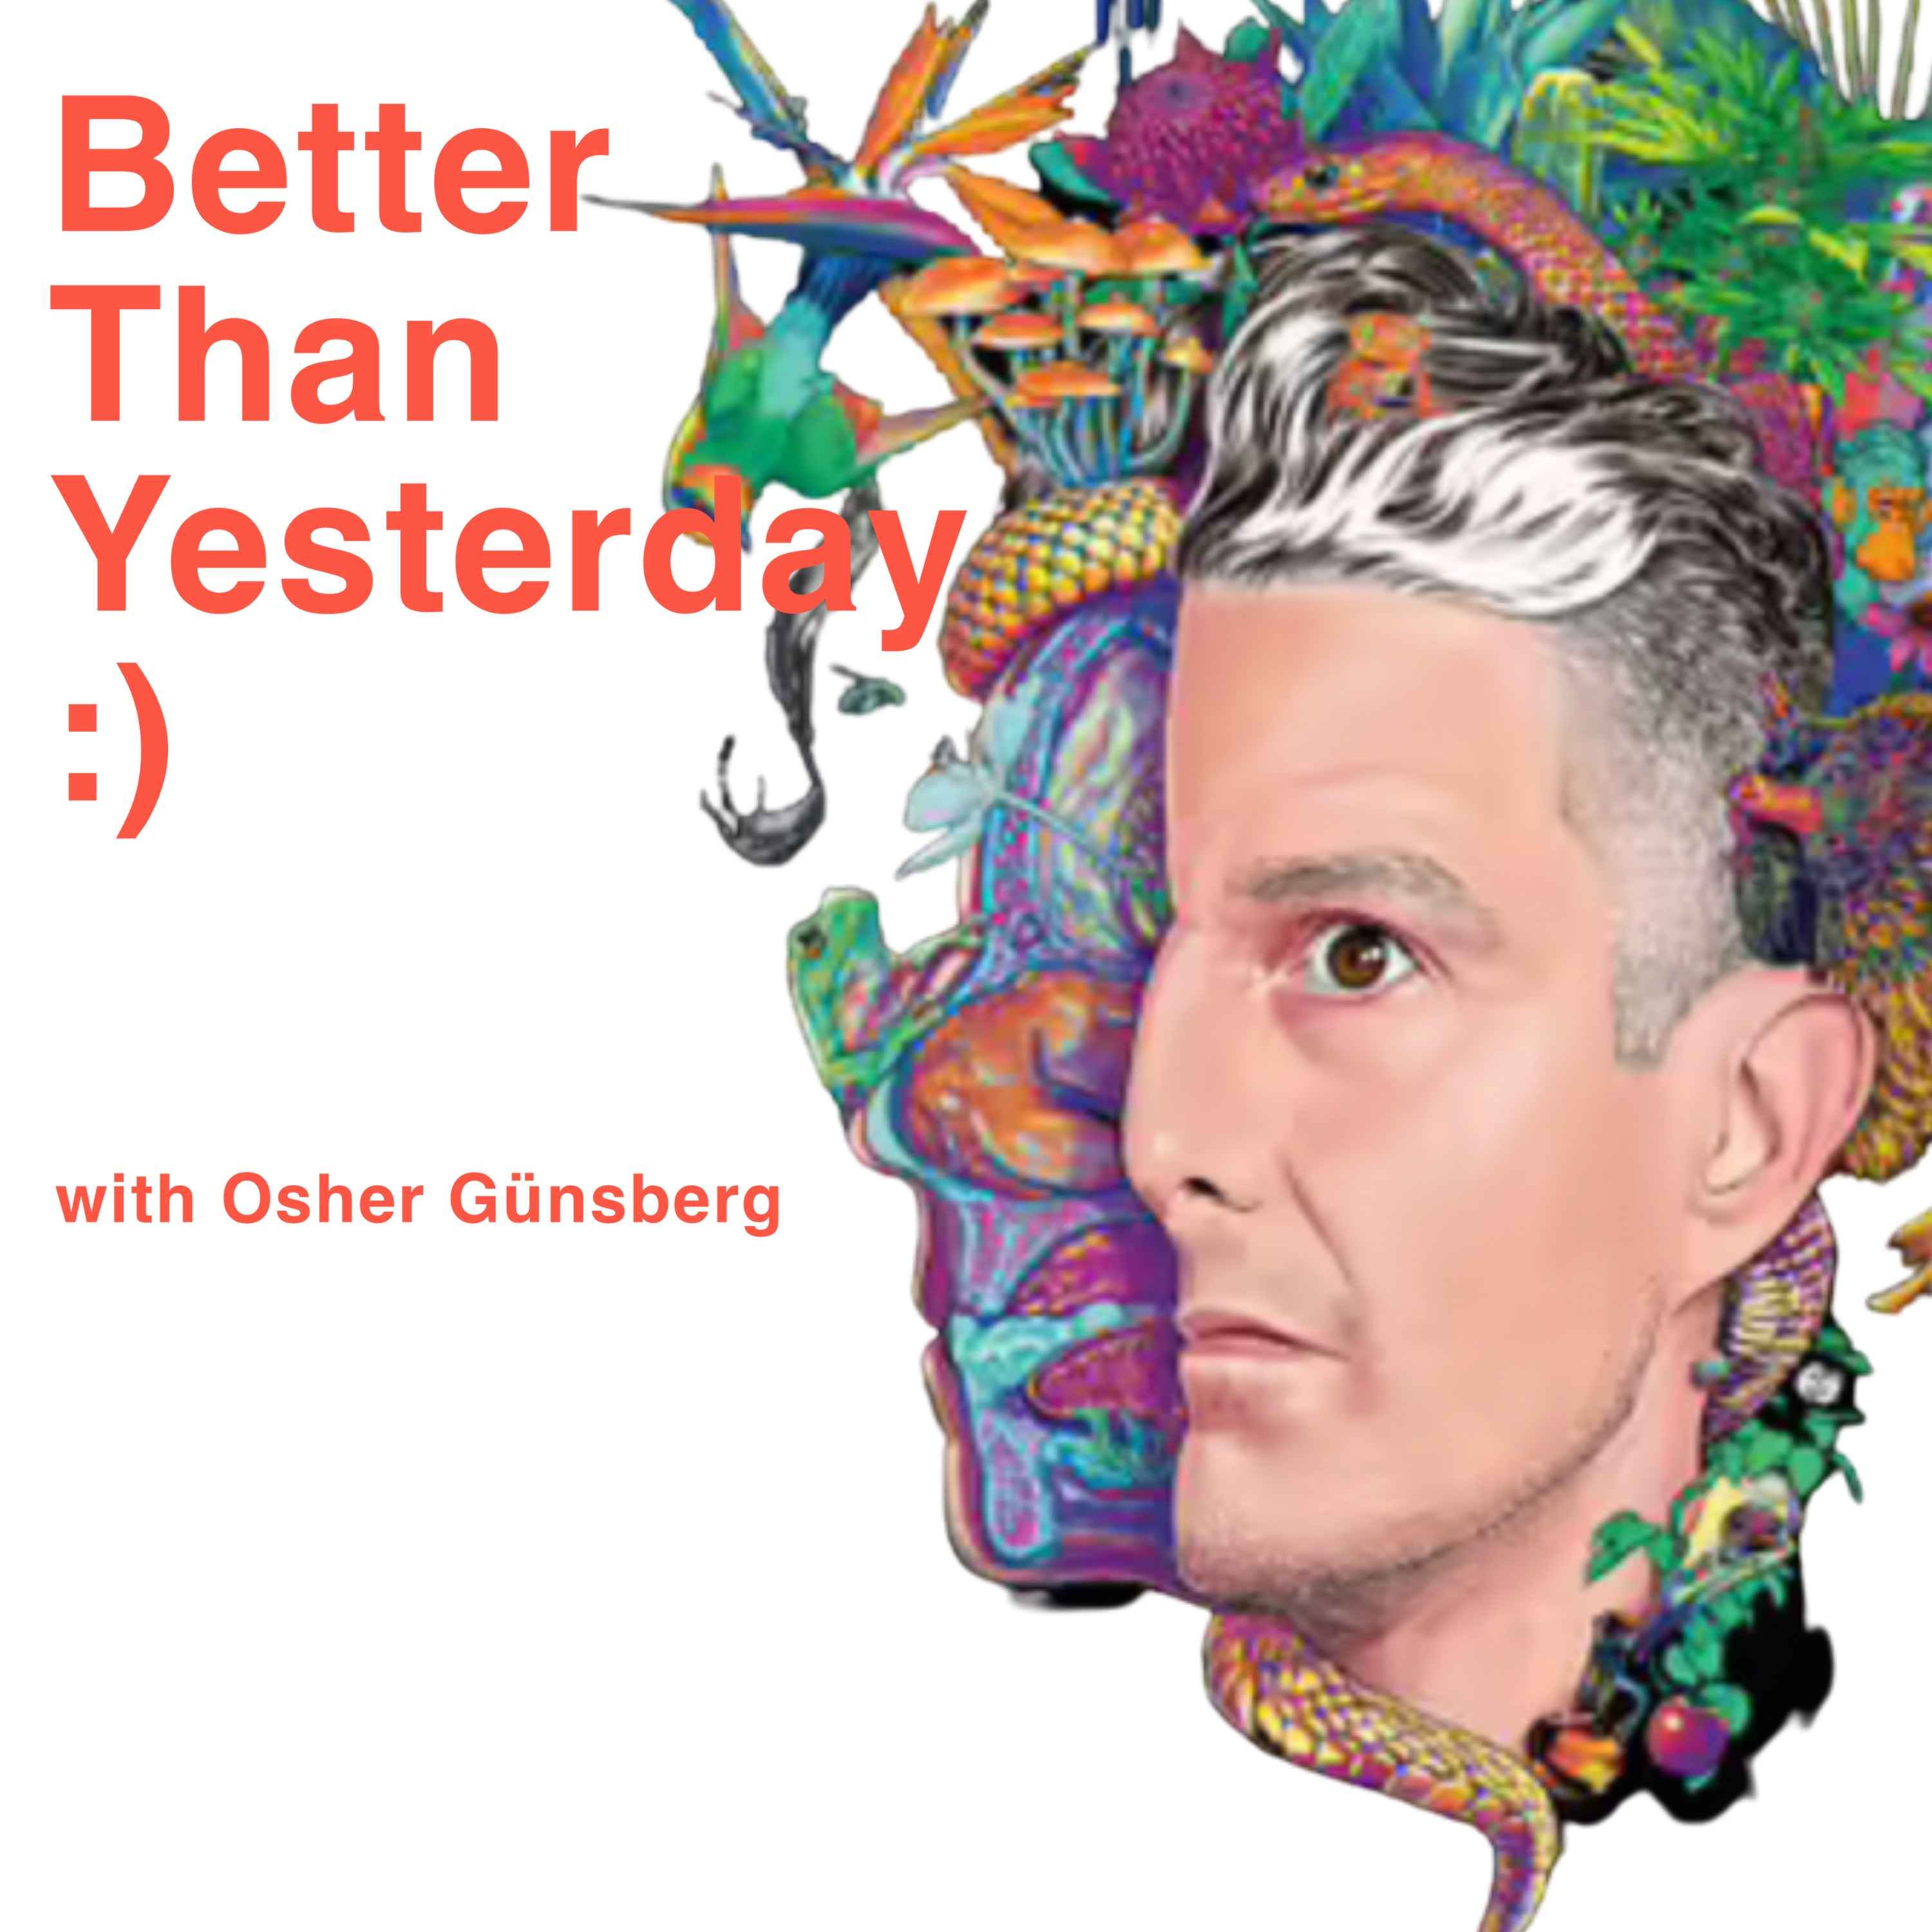 461: No, Wil Anderson is NOT fine thanks